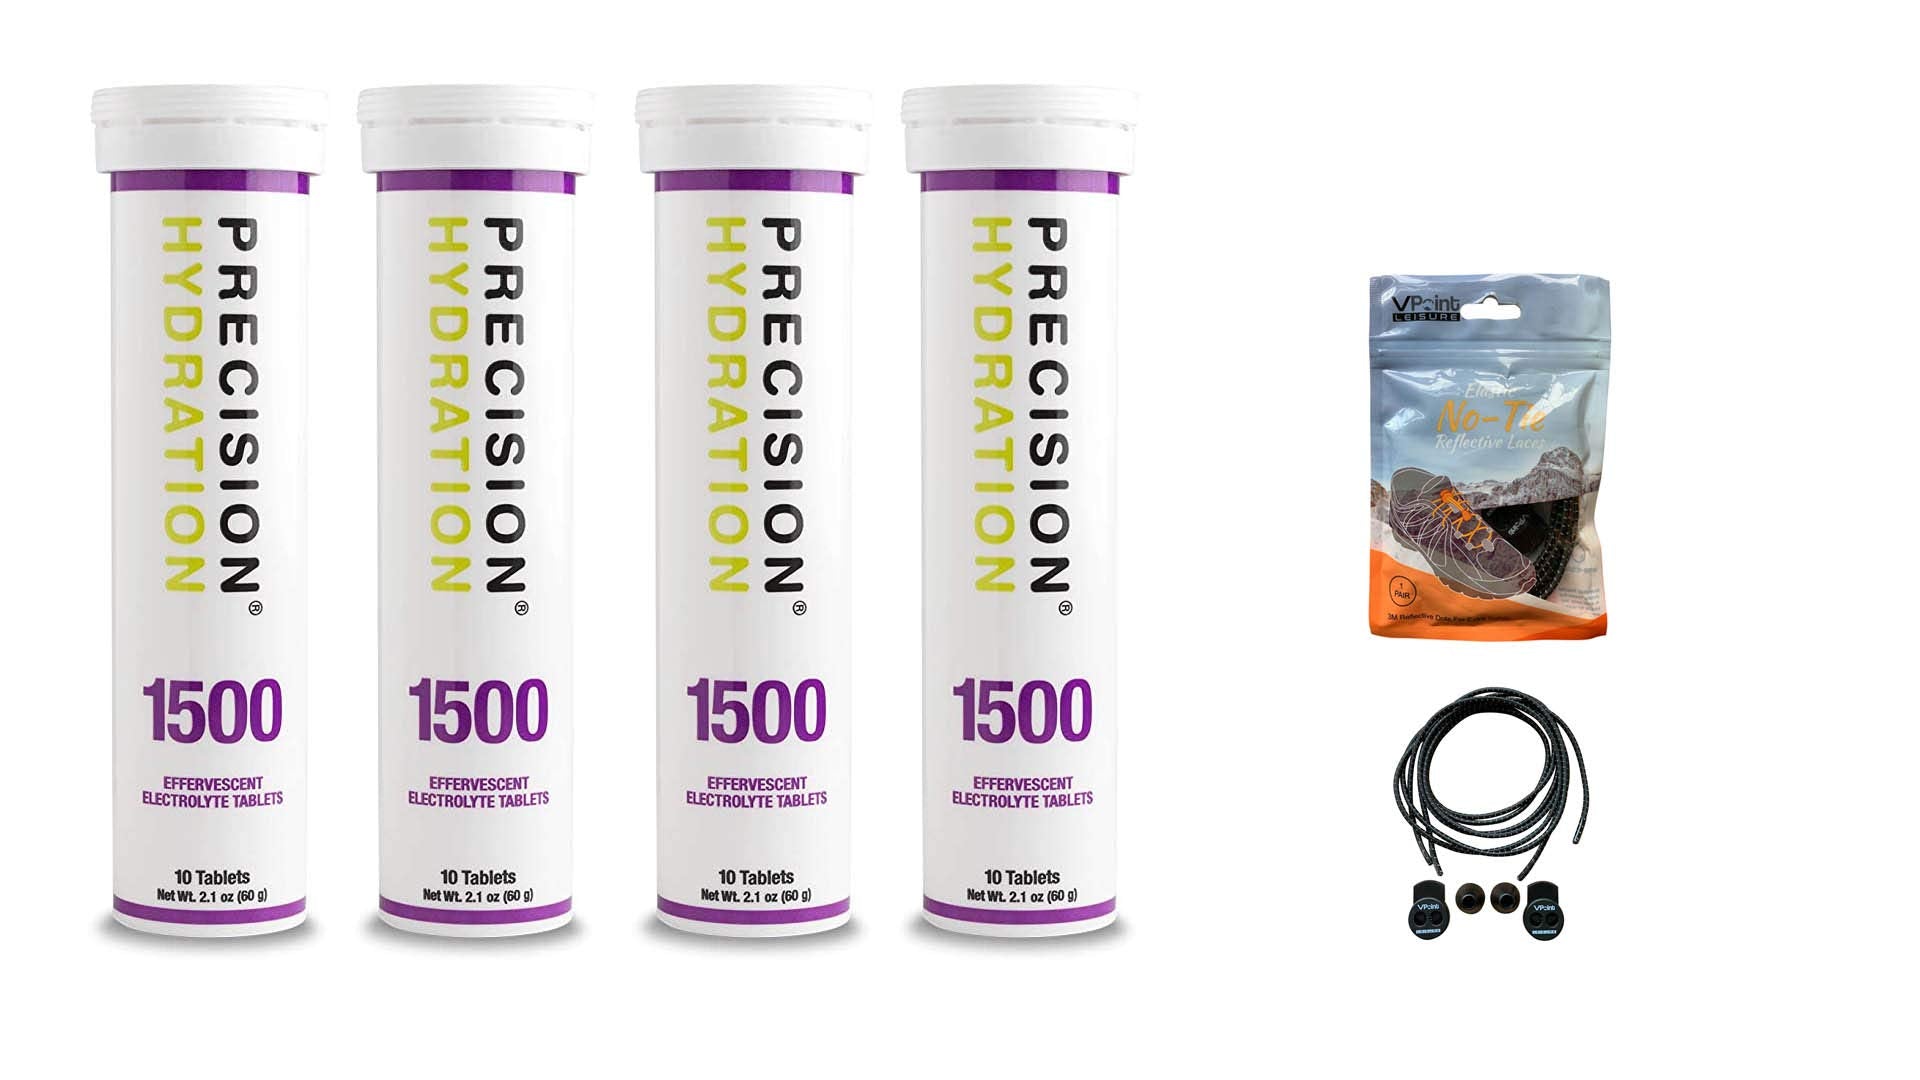 Precision Hydration Electrolyte Tablets - 4 Tubes of 10 x Tabs (1500 Strength). Bundled with a Pack of VPoint Leisure Elastic No-tie Reflective Shoe Laces